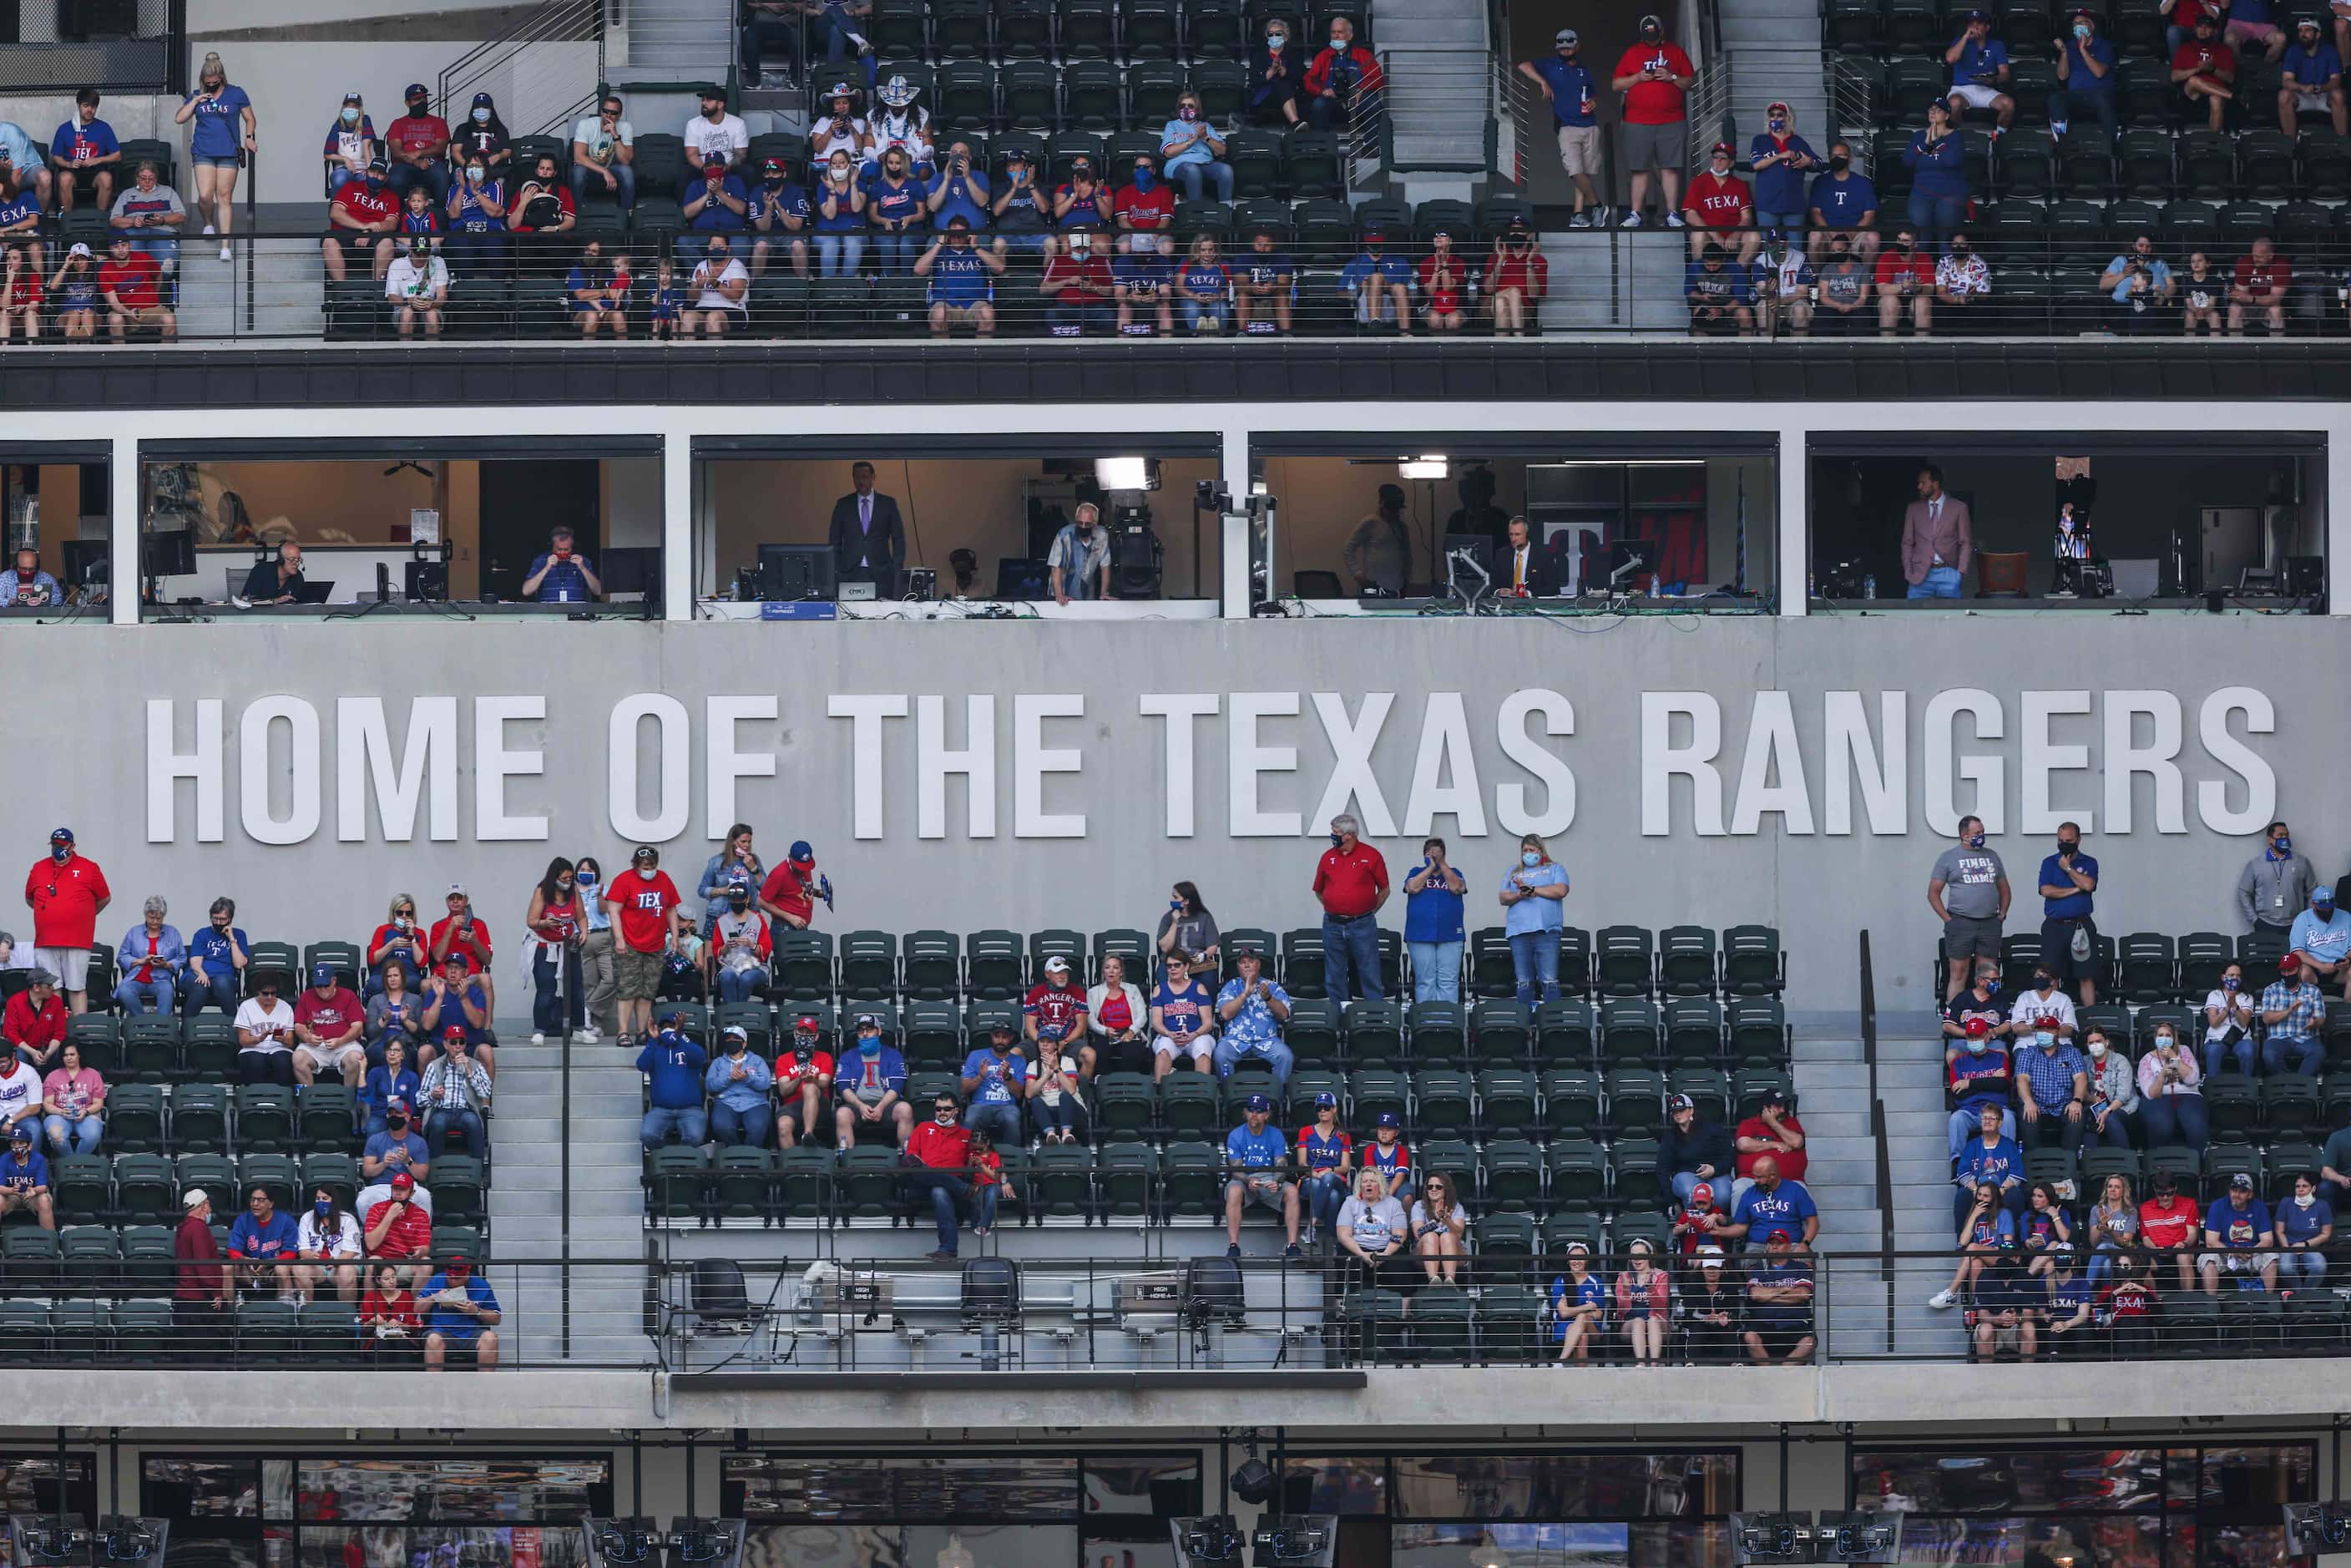 Fans start to arrive at the Globe Life Field to attend the game between Texas Rangers and...